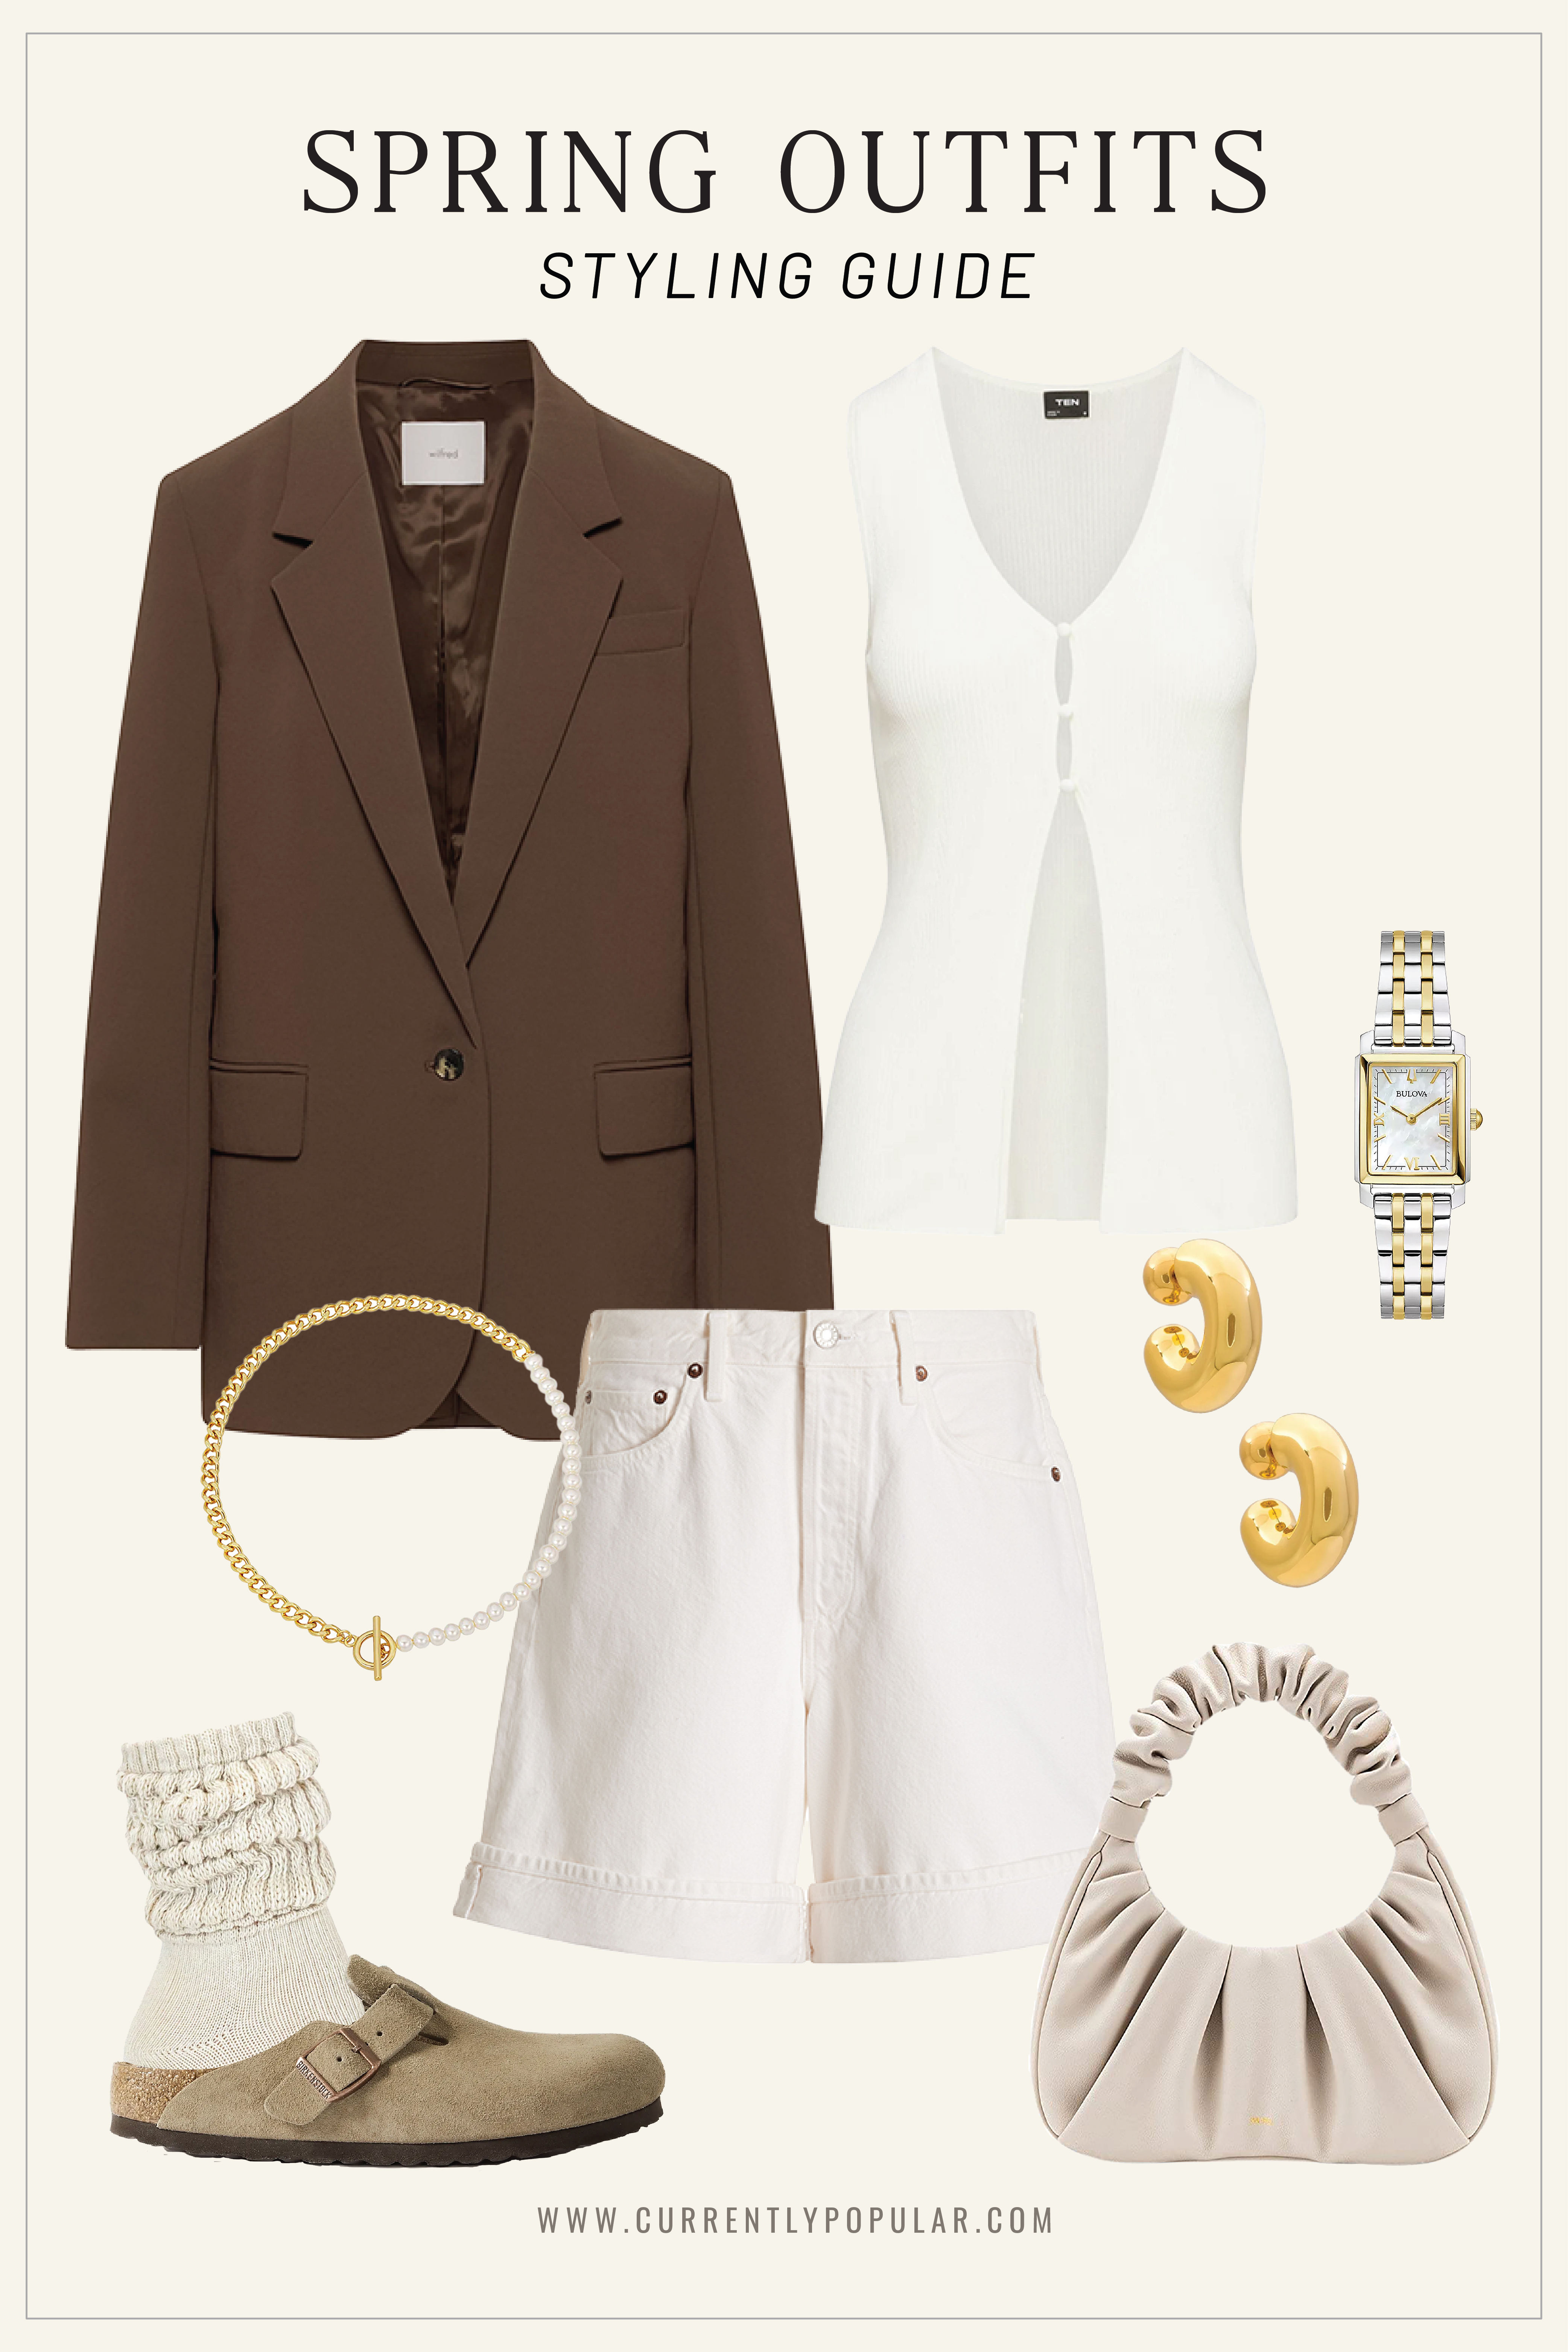 Casual Spring Outfit: Brown Blazer, White Tank, Ivory Shorts, Chunky Gold Jewelry, Birkenstocks Boston Soft Footbed Clog, Slouch Socks.